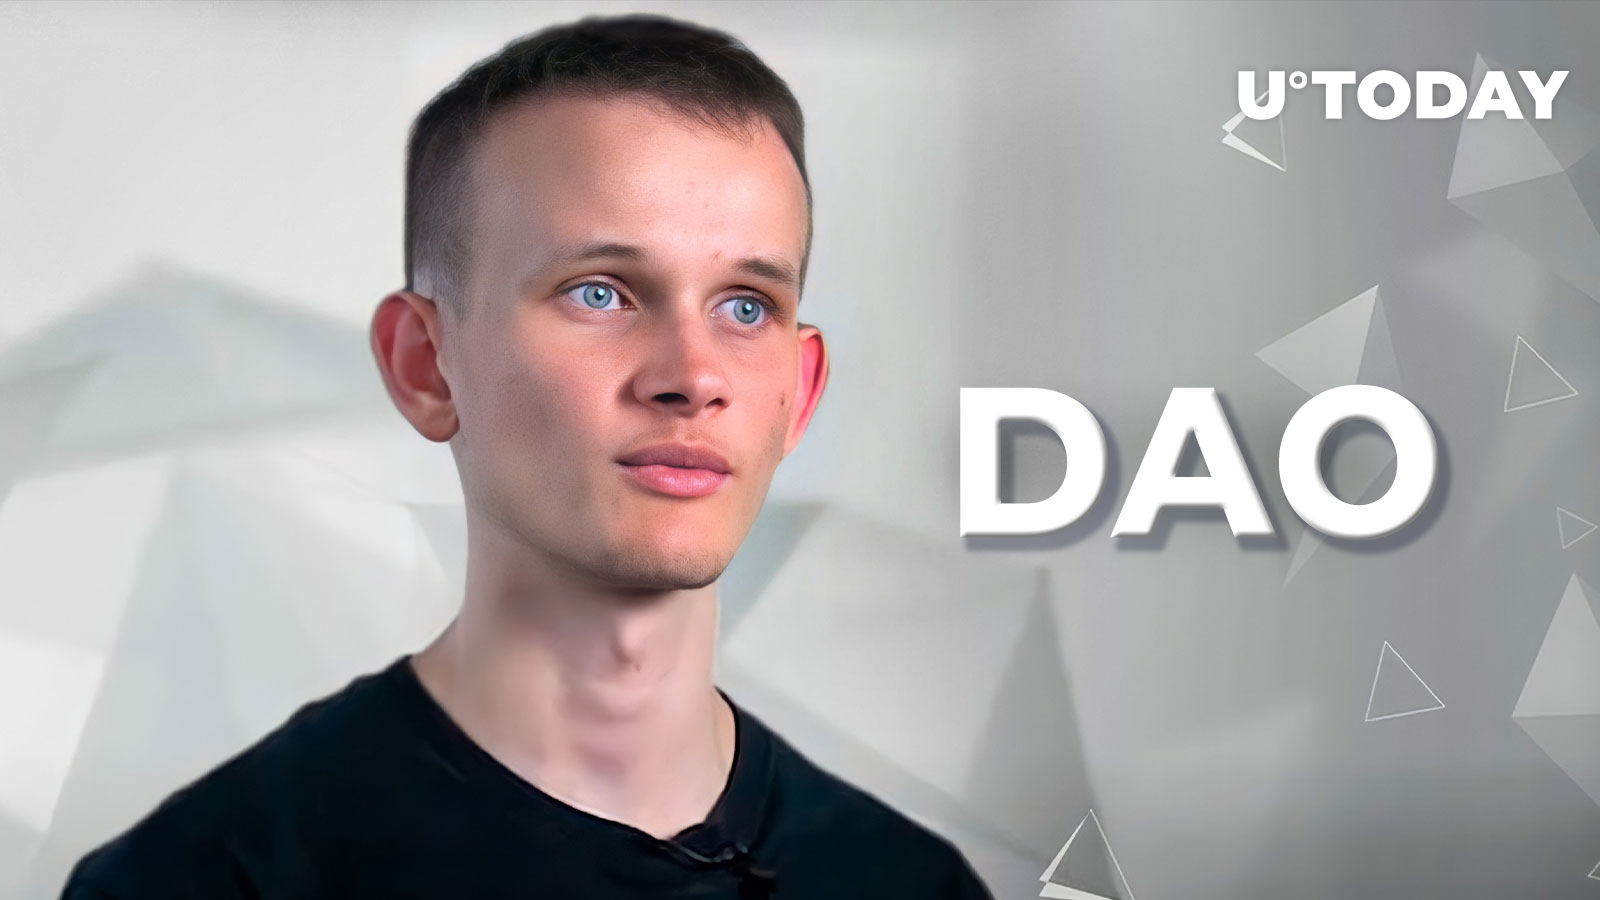 Ethereum's Vitalik Buterin Explains Why DAOs Are Not Supposed to Function  as Corporations | NodersKnow